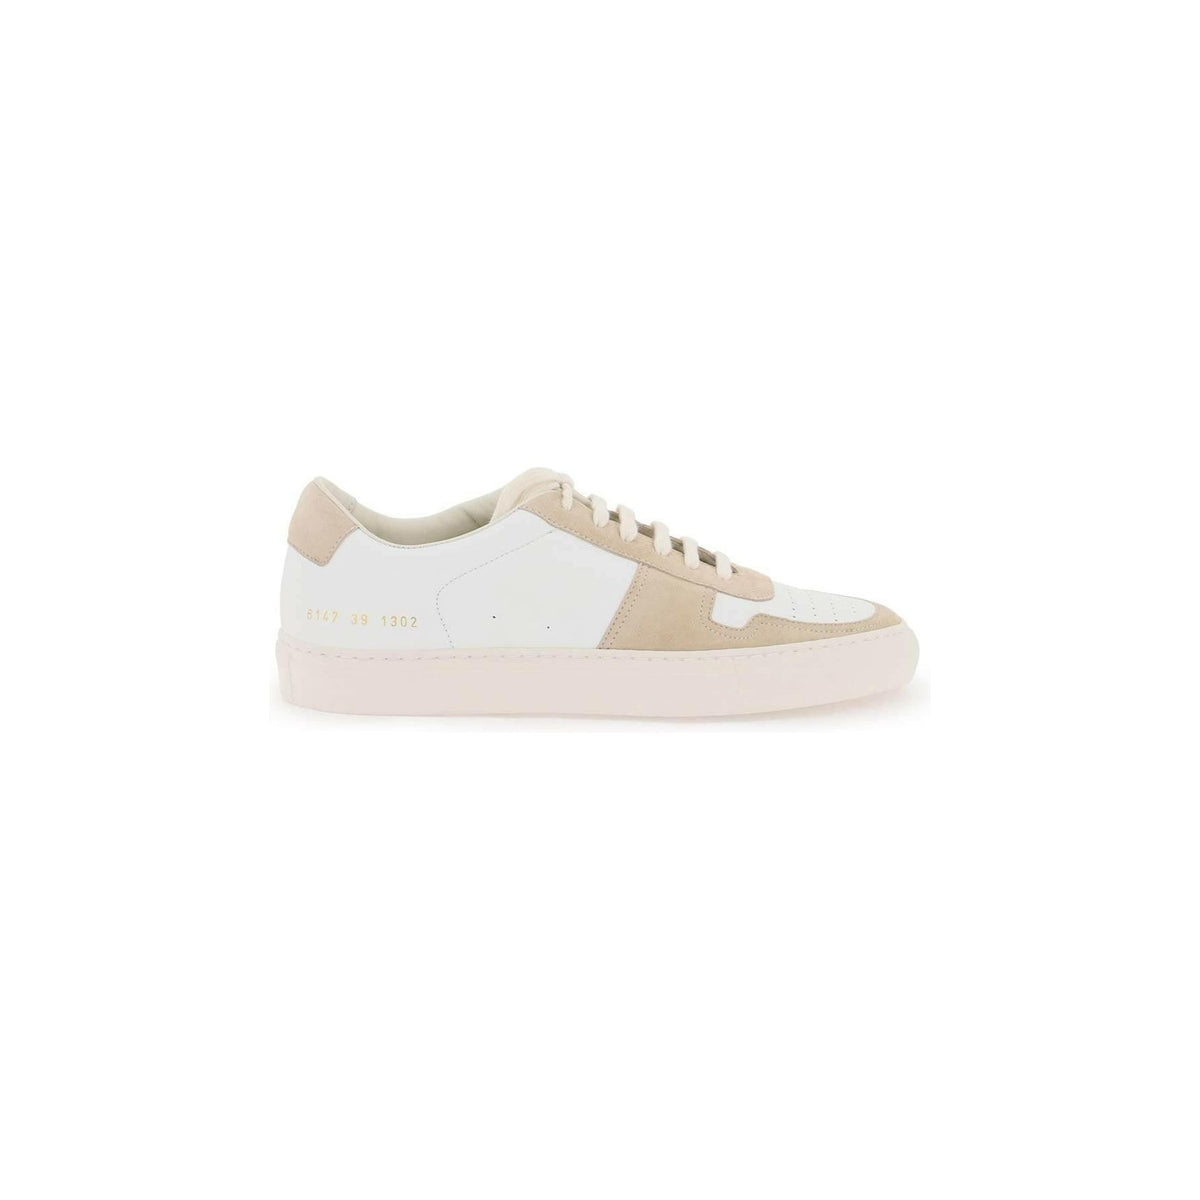 COMMON PROJECTS - BBall Nappa Leather Sneakers - JOHN JULIA